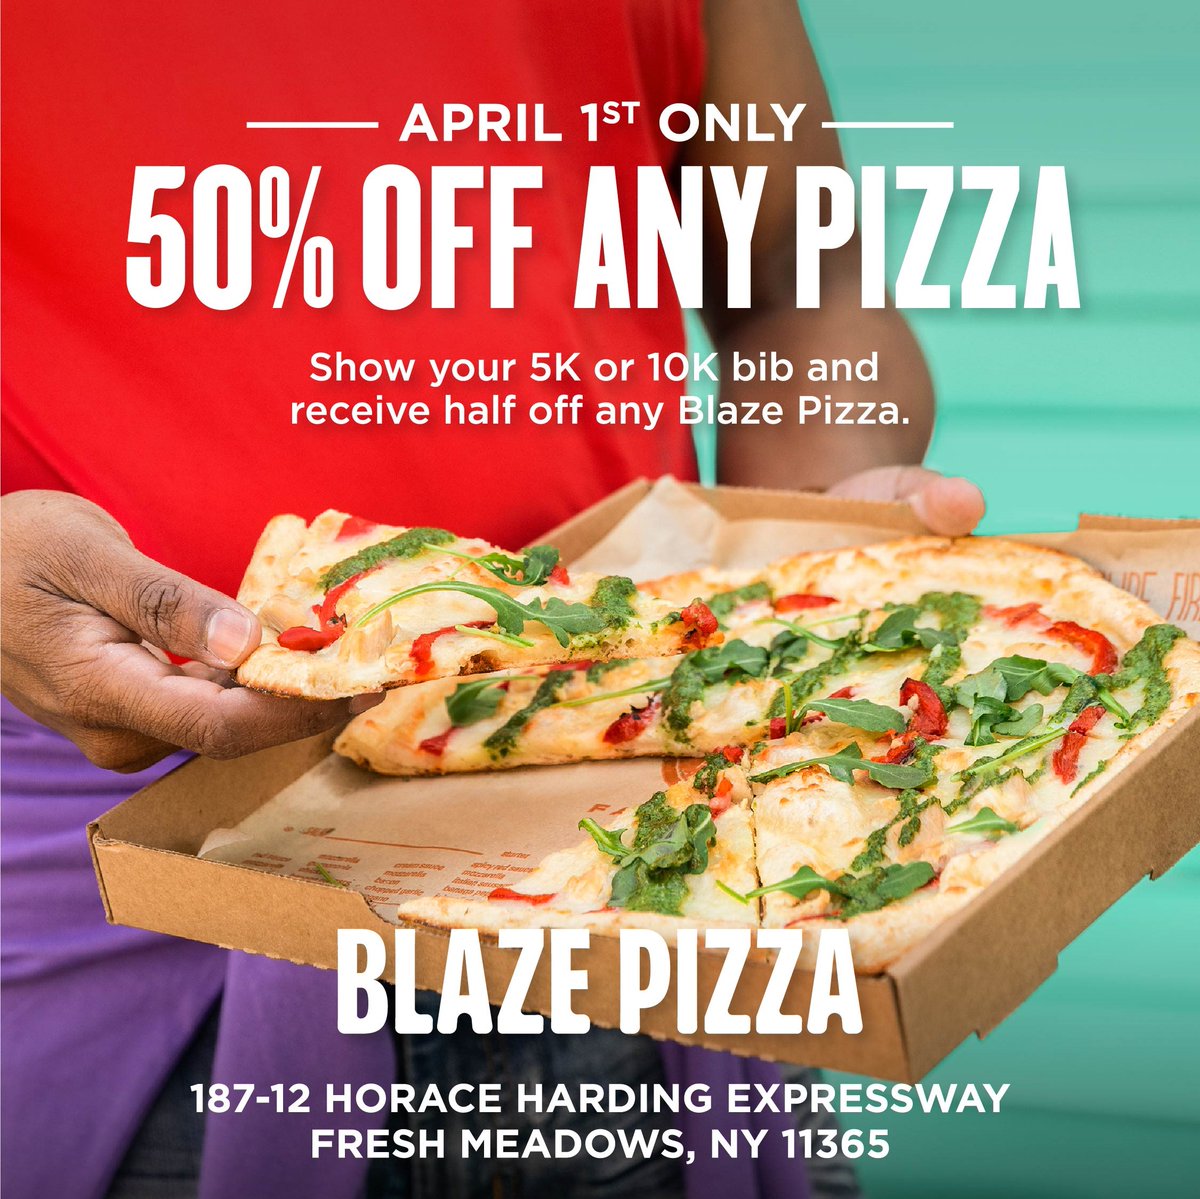 Running with us this weekend for the NYCRUNS #Queens5K10K? Make your post-race plans now to head over to #BlazePizza to get 50% off any pizza for all our runners! Just show your bib and enjoy a cheesy, well-deserved feast!🍕